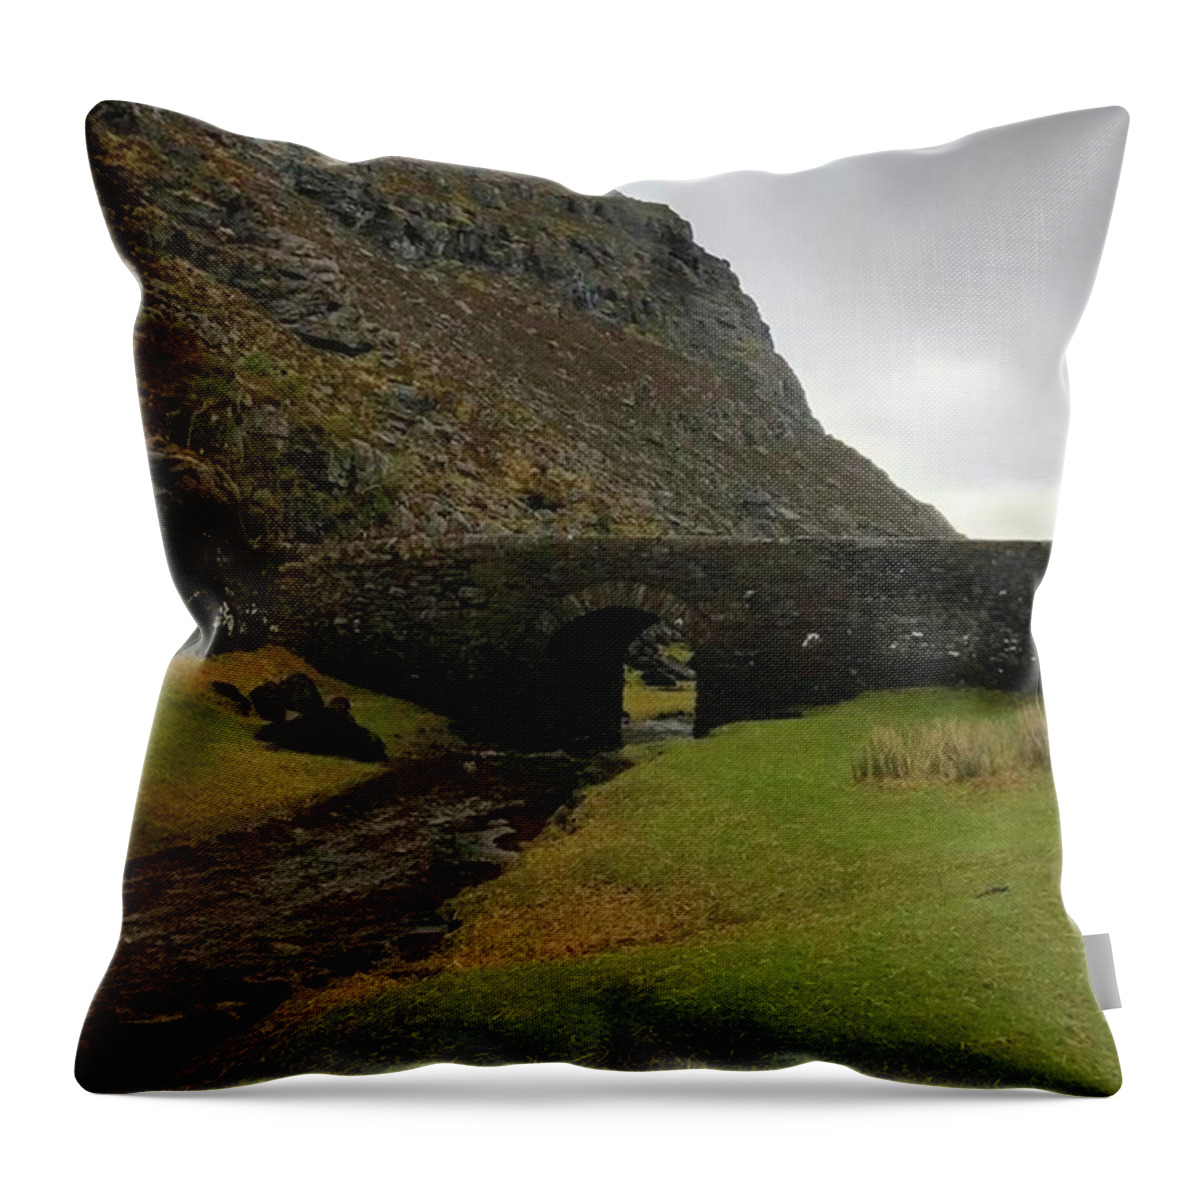  Throw Pillow featuring the photograph Between The First Two Lakes Is An Old by Katie Cupcakes